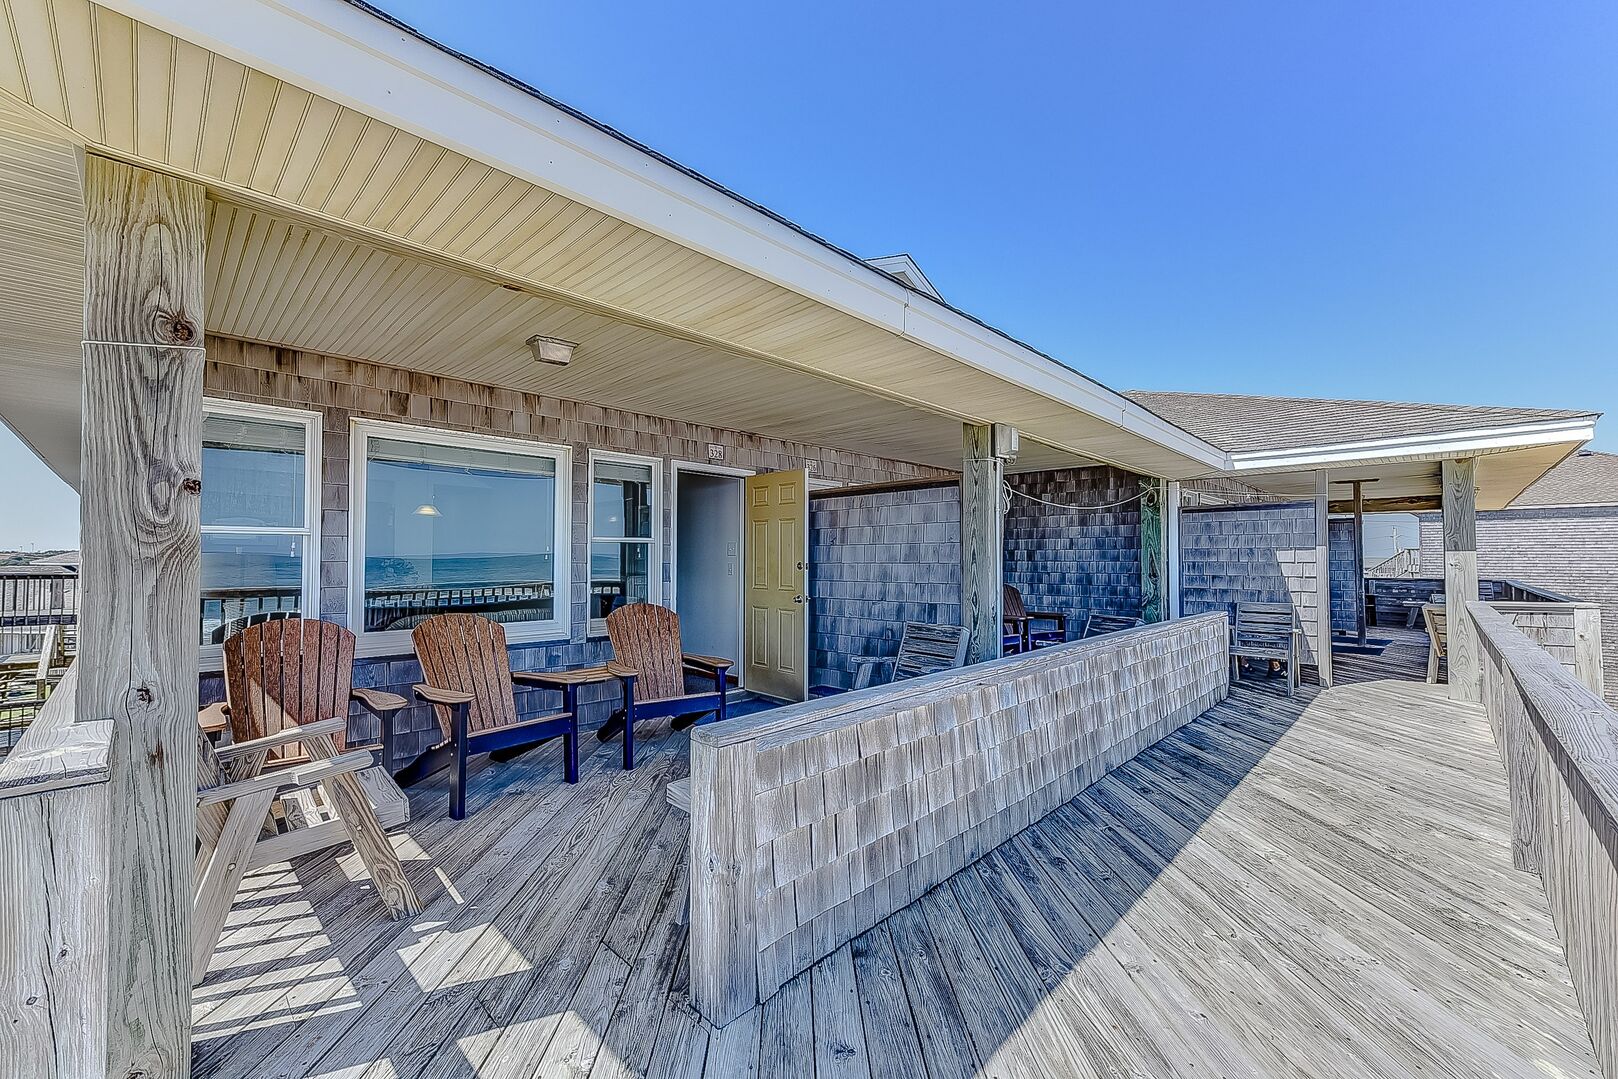 The exterior of our Cape Hatteras oceanfront rentals